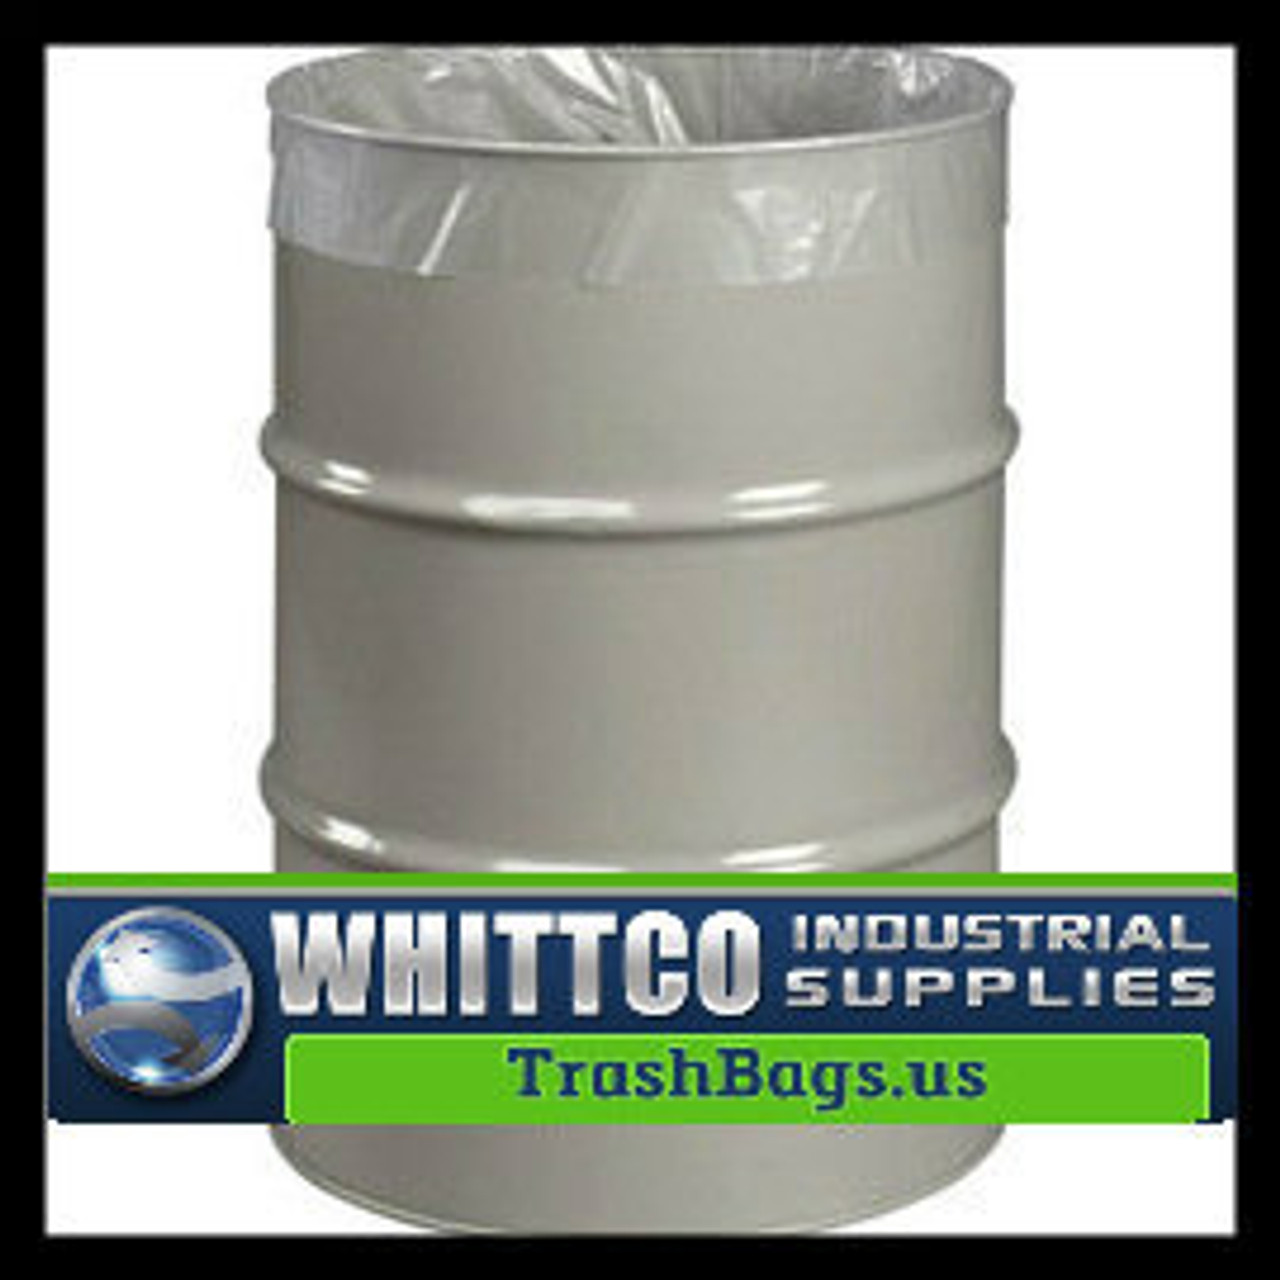 Black LDPE Drum Liners 38 x 65 x 6 Mil Case:50 55-60 Gallons